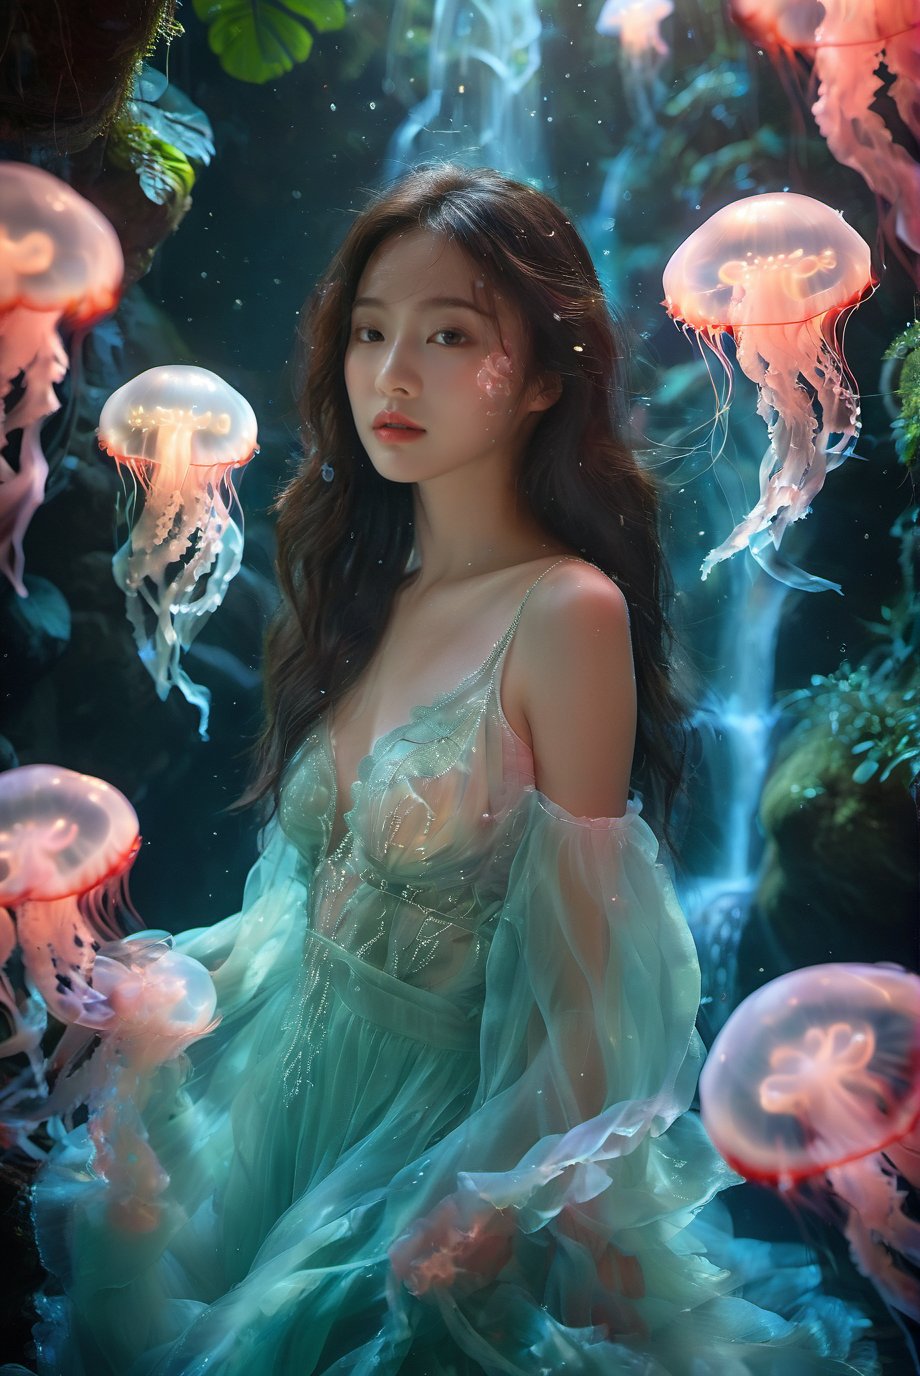 An Asian young woman with long flowing hair, adorned in a delicate emerald red lingerie, surrounded by a mesmerizing rainforest waterfall environment. She stands amidst a dance of luminescent jellyfish, which glow in hues of pink and blue. The backdrop is a cascading waterfall, punctuated by the soft glow of bioluminescent plants and the gentle mist of water. The woman's gaze is distant, as if lost in thought, while the jellyfish float gracefully around her, creating an ethereal and dreamlike atmosphere.